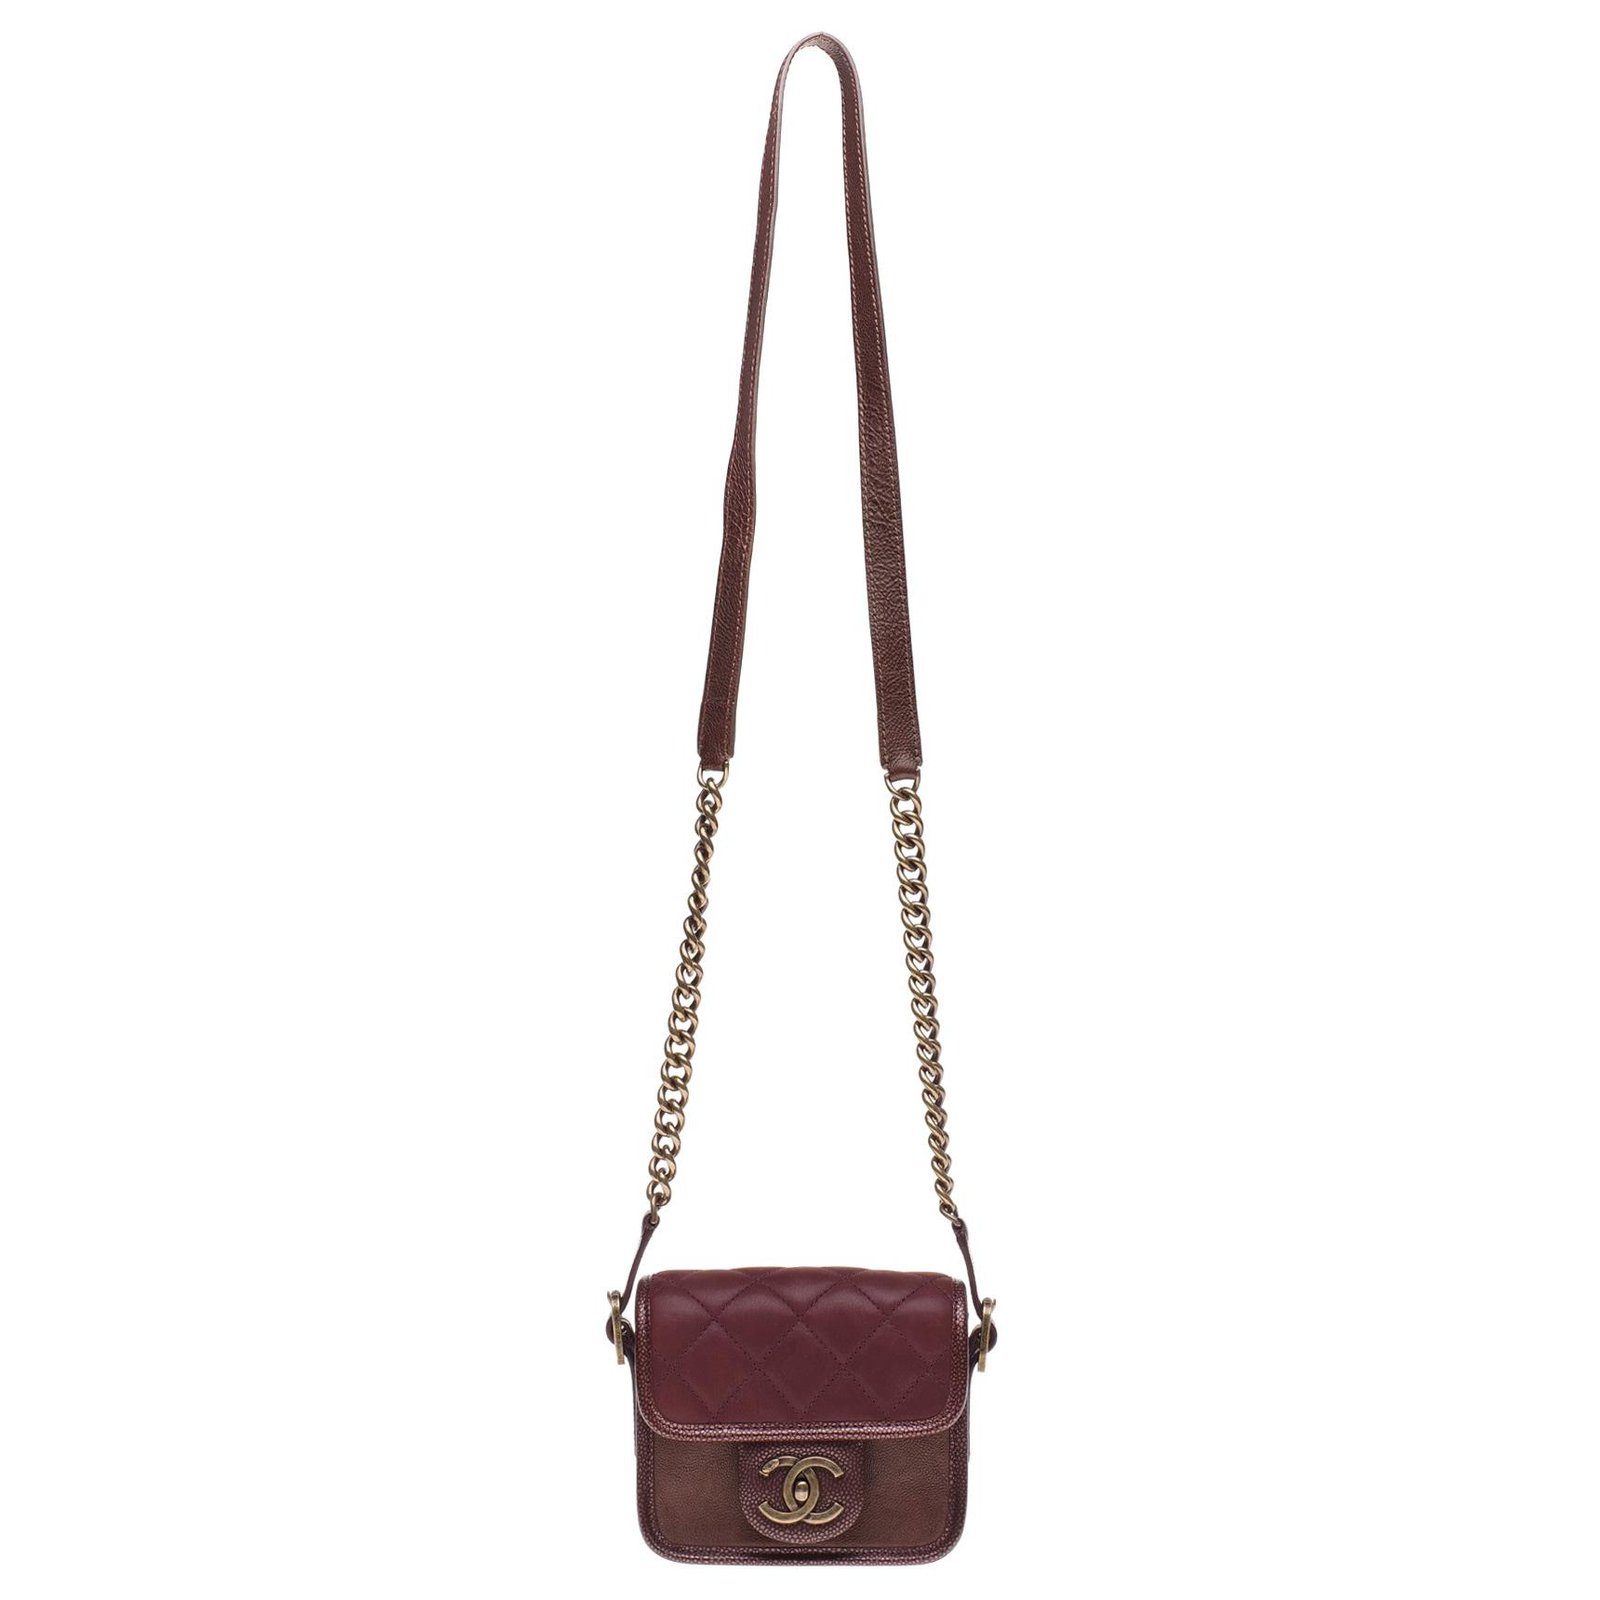 Superb Mini Chanel burgundy handbag in partially quilted leather, hardware  in aged gold metal in excellent condition! Dark red ref.189537 - Joli Closet